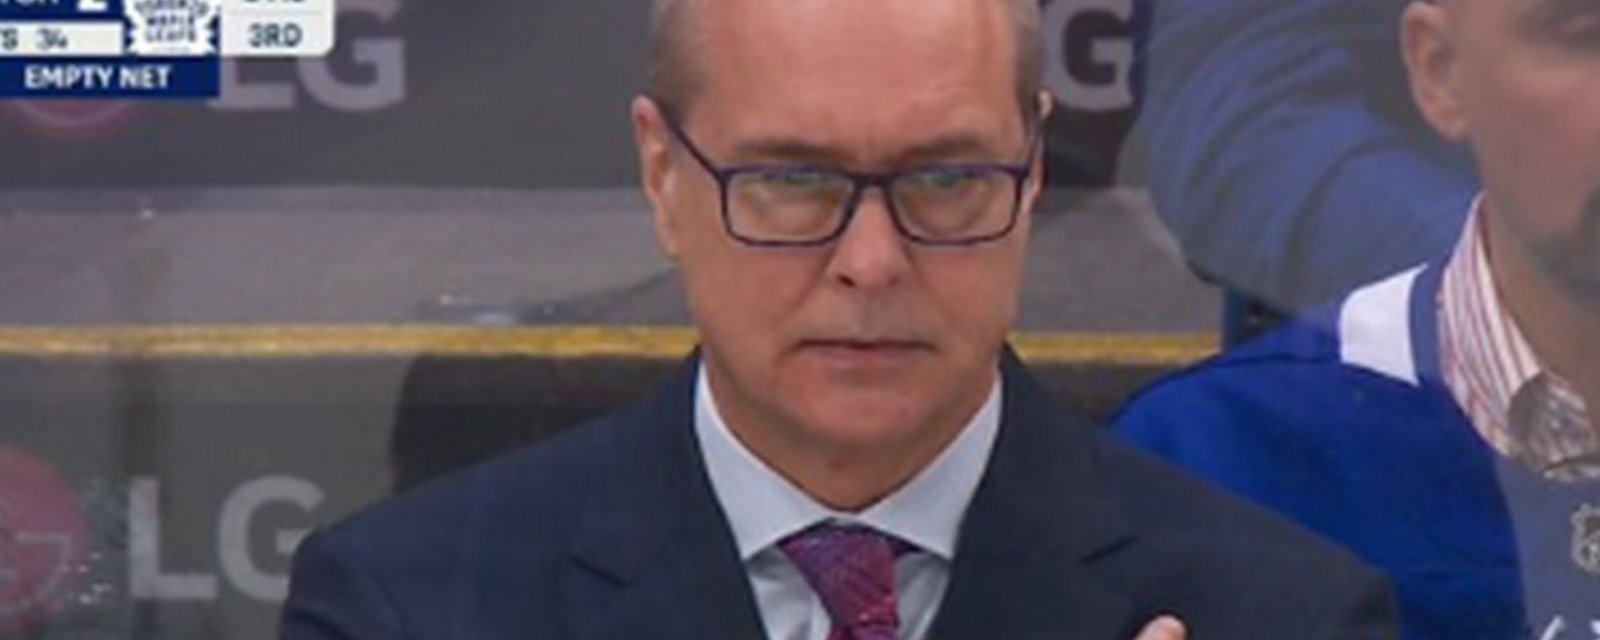 Paul Maurice takes a hilarious jab at the referees late in Game 1